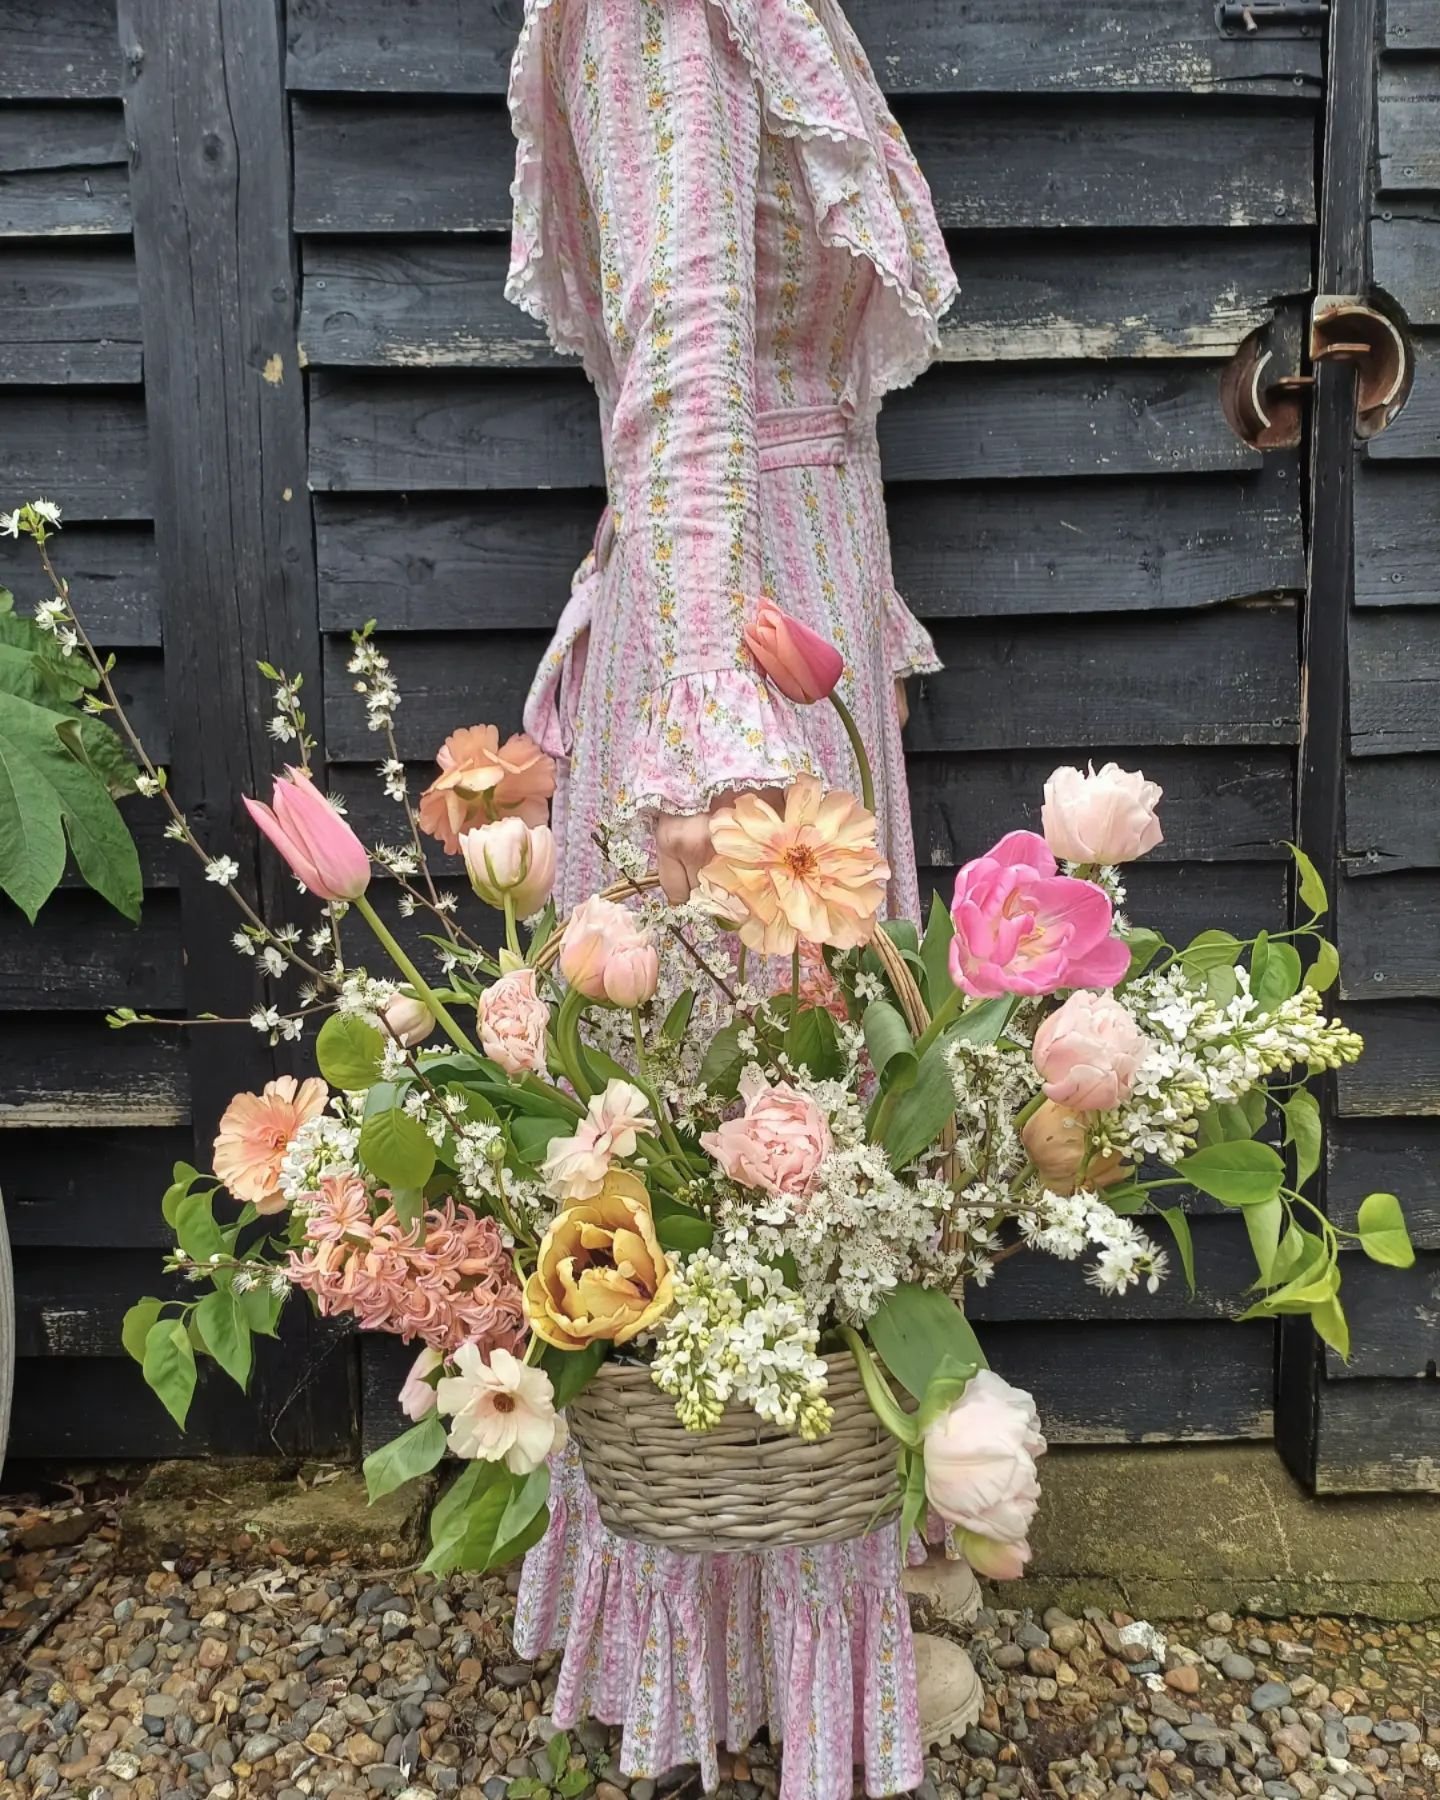 When Hayley @littlepinkgarden invited me to come and have a play with her flowers to show you what to expect from our Spring Basket Workshop on May 4th, I jumped at the chance.
Even on the greyest of days this week, the farm was such a beautiful and 